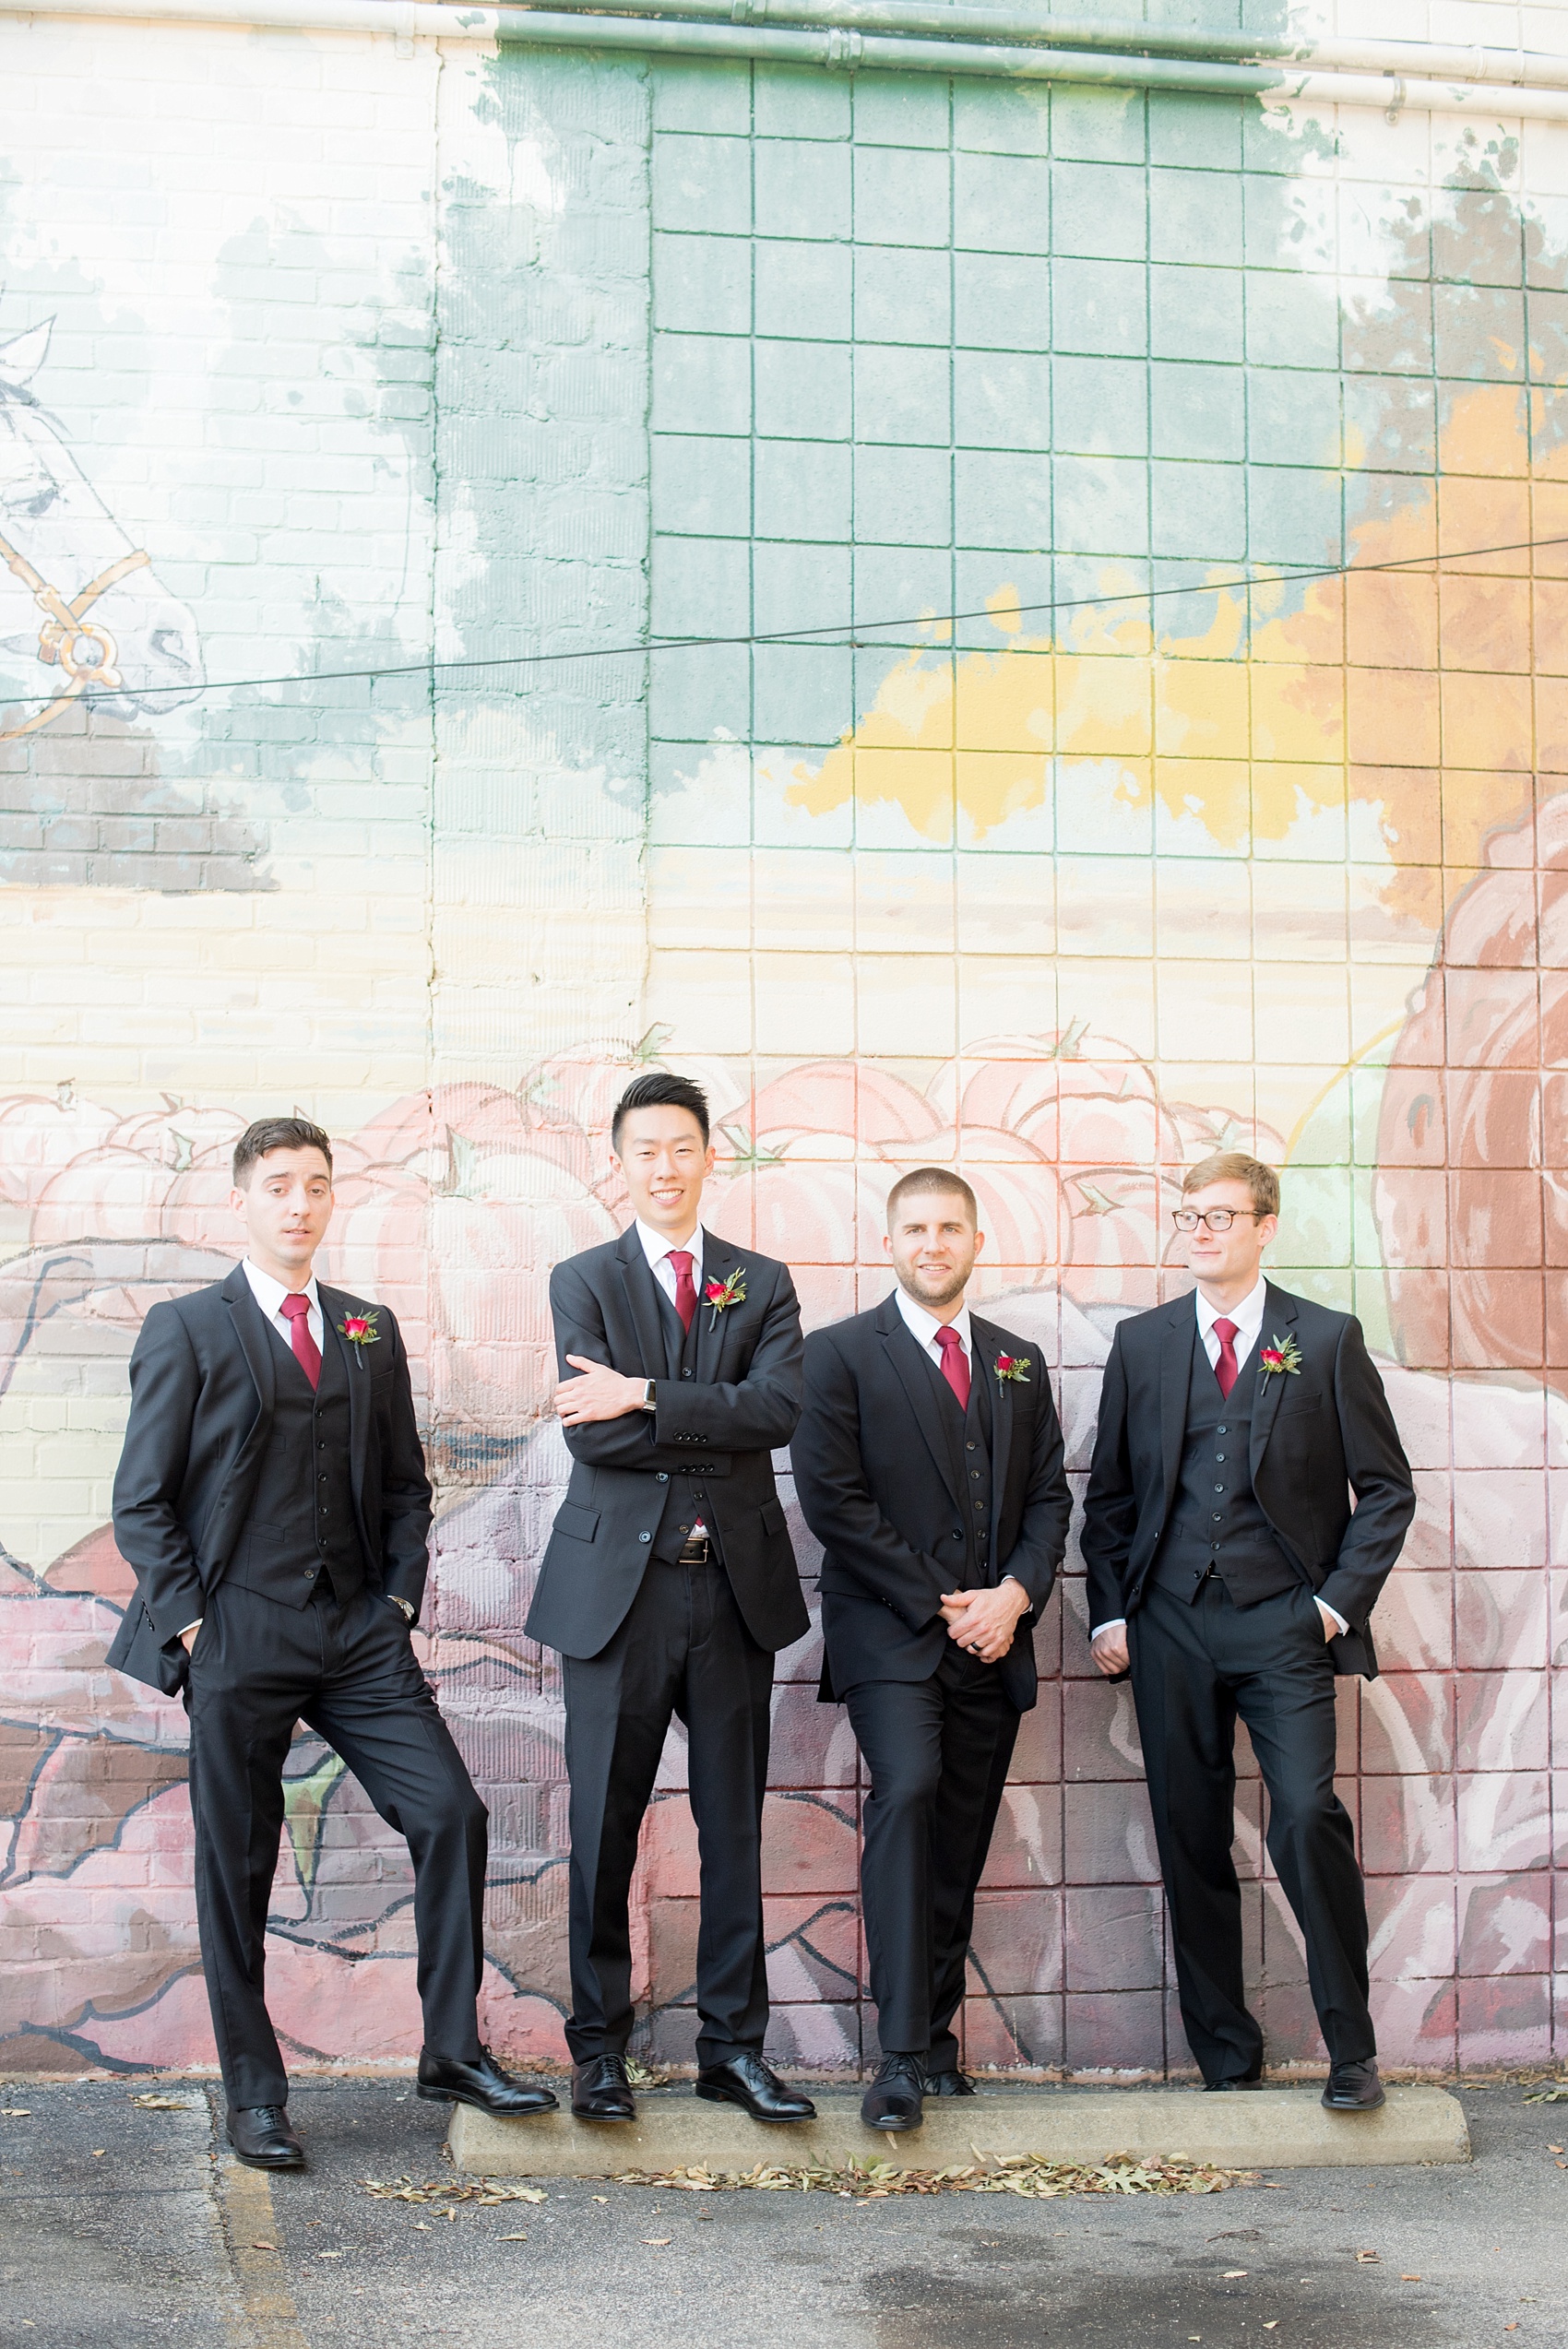 Mikkel Paige Photography photos of a wedding in downtown Raleigh. An image of the groomsmen in front of a colorful street art mural.